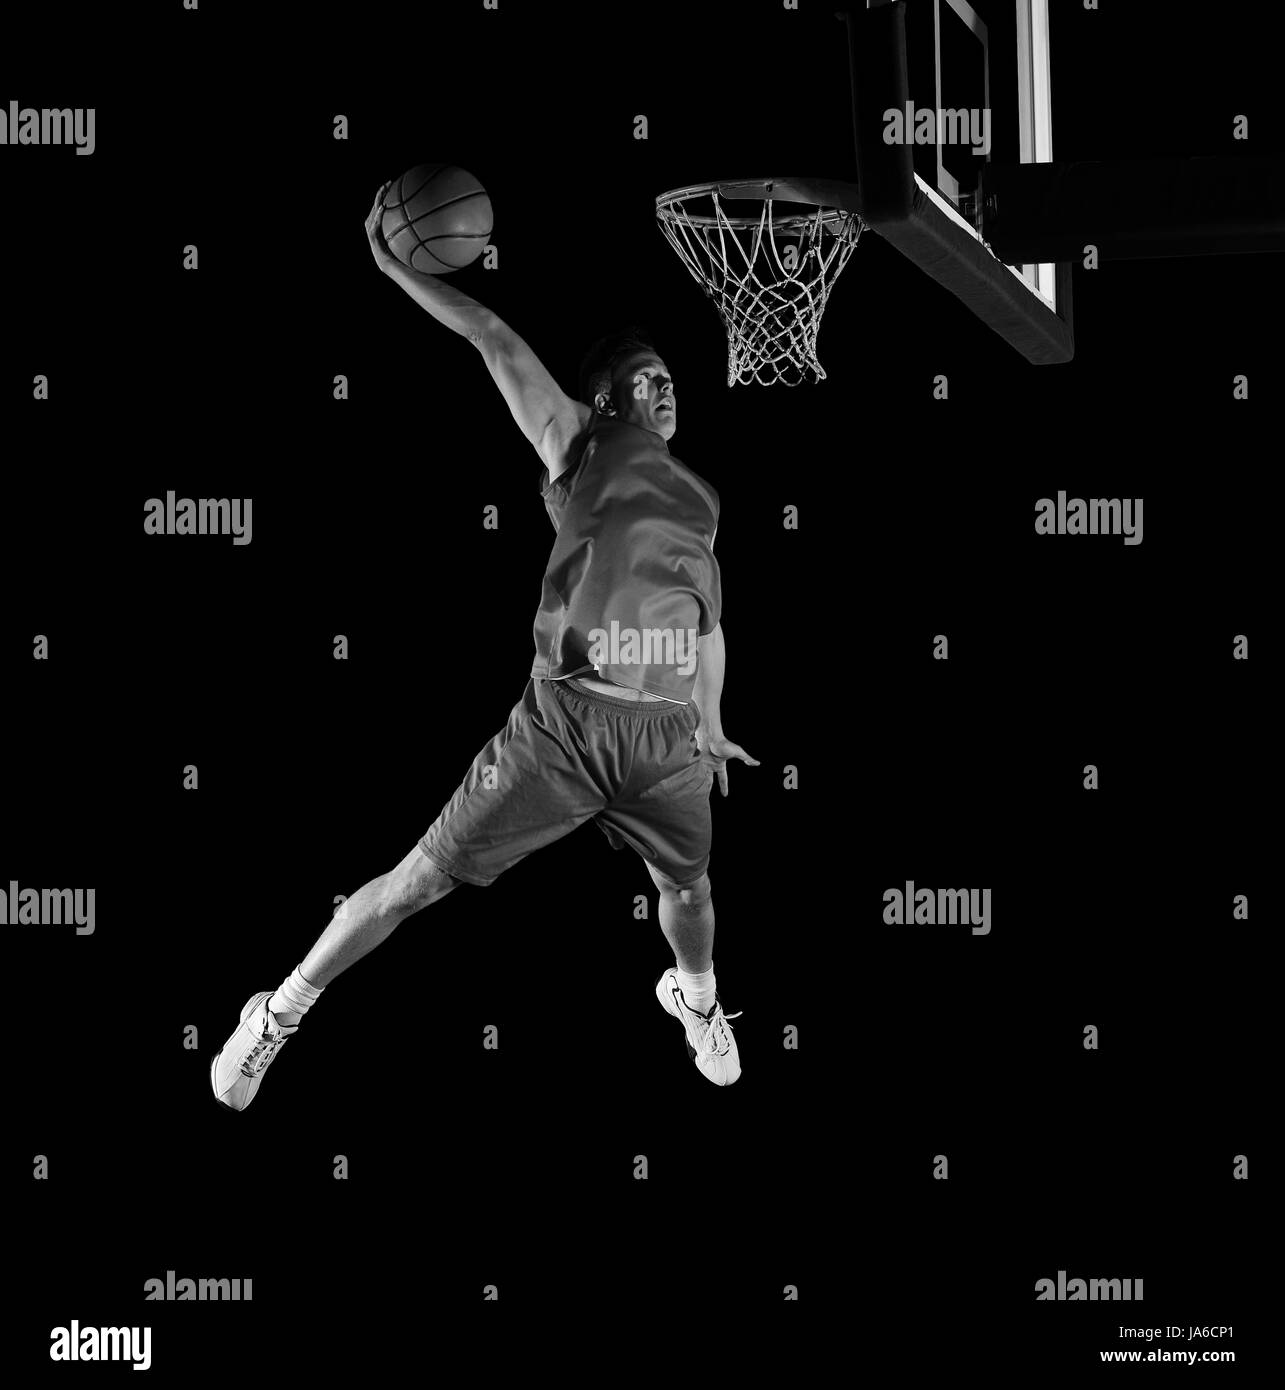 Tall basketball player Black and White Stock Photos & Images - Alamy